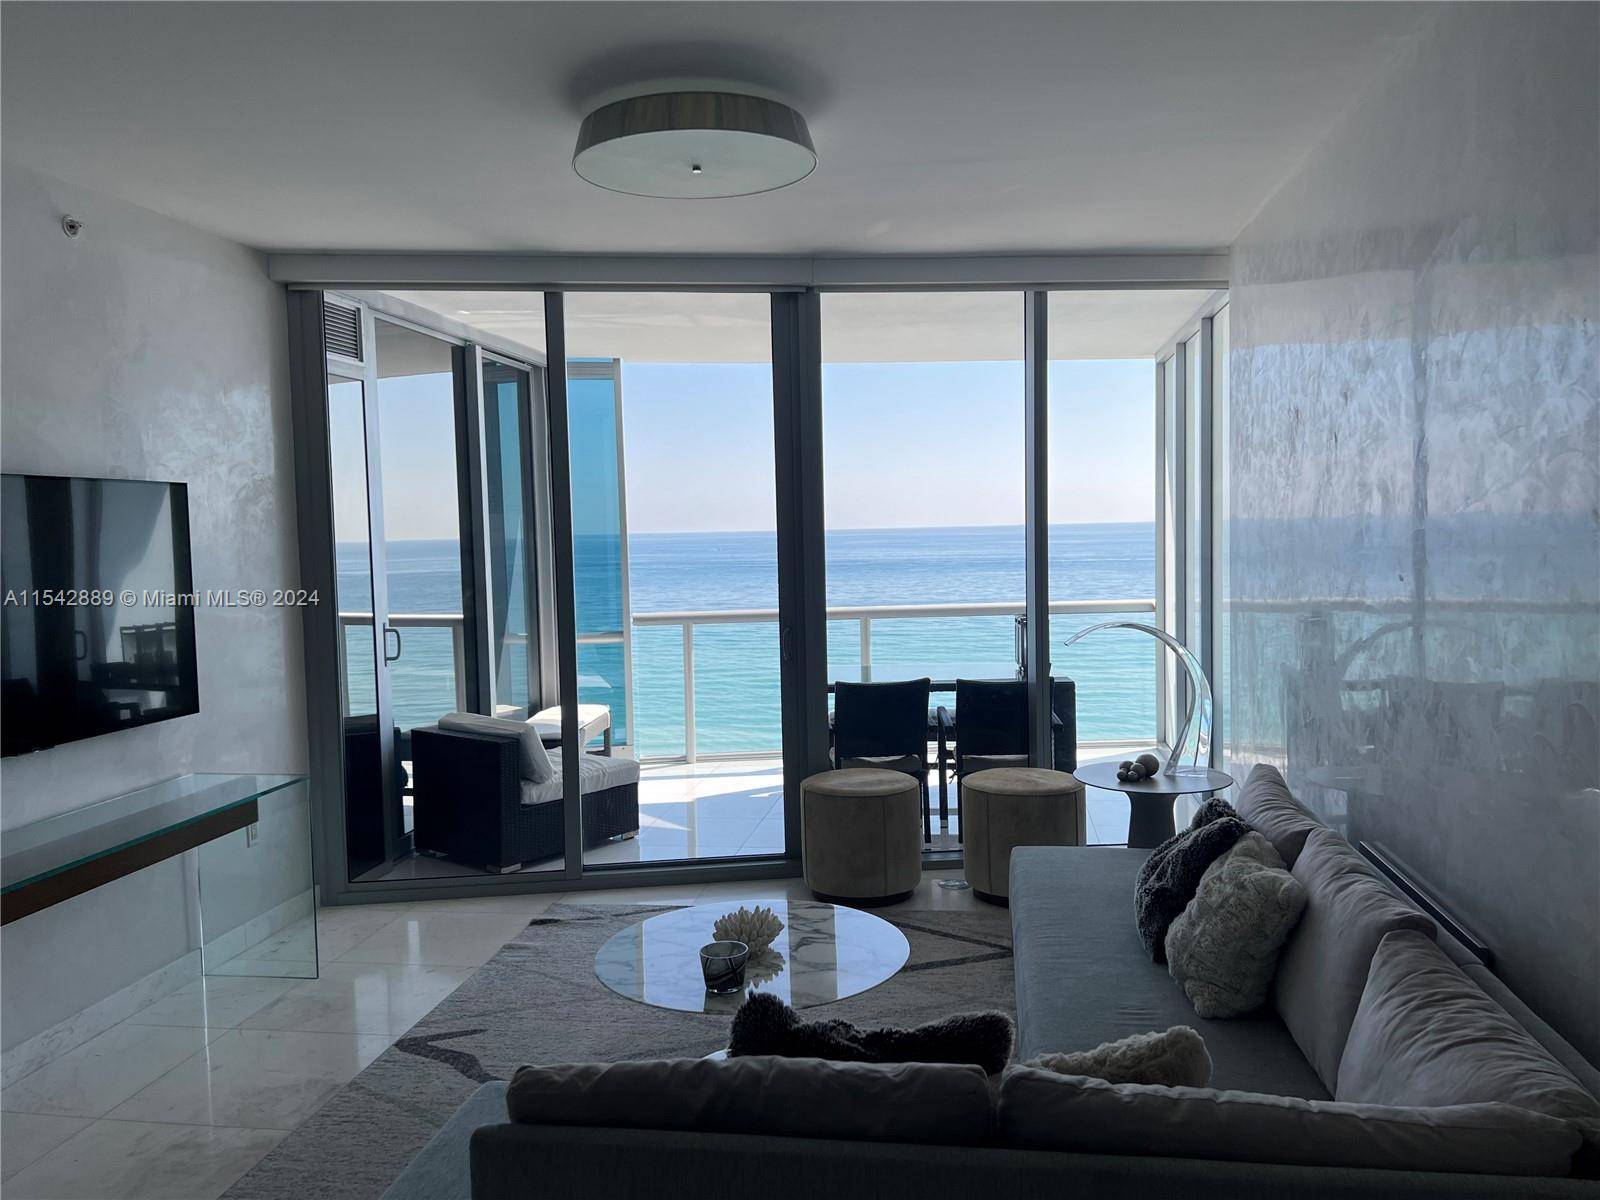 As you enter this apt, your eyes are immediately drawn to the stunning panoramic view of the sea.